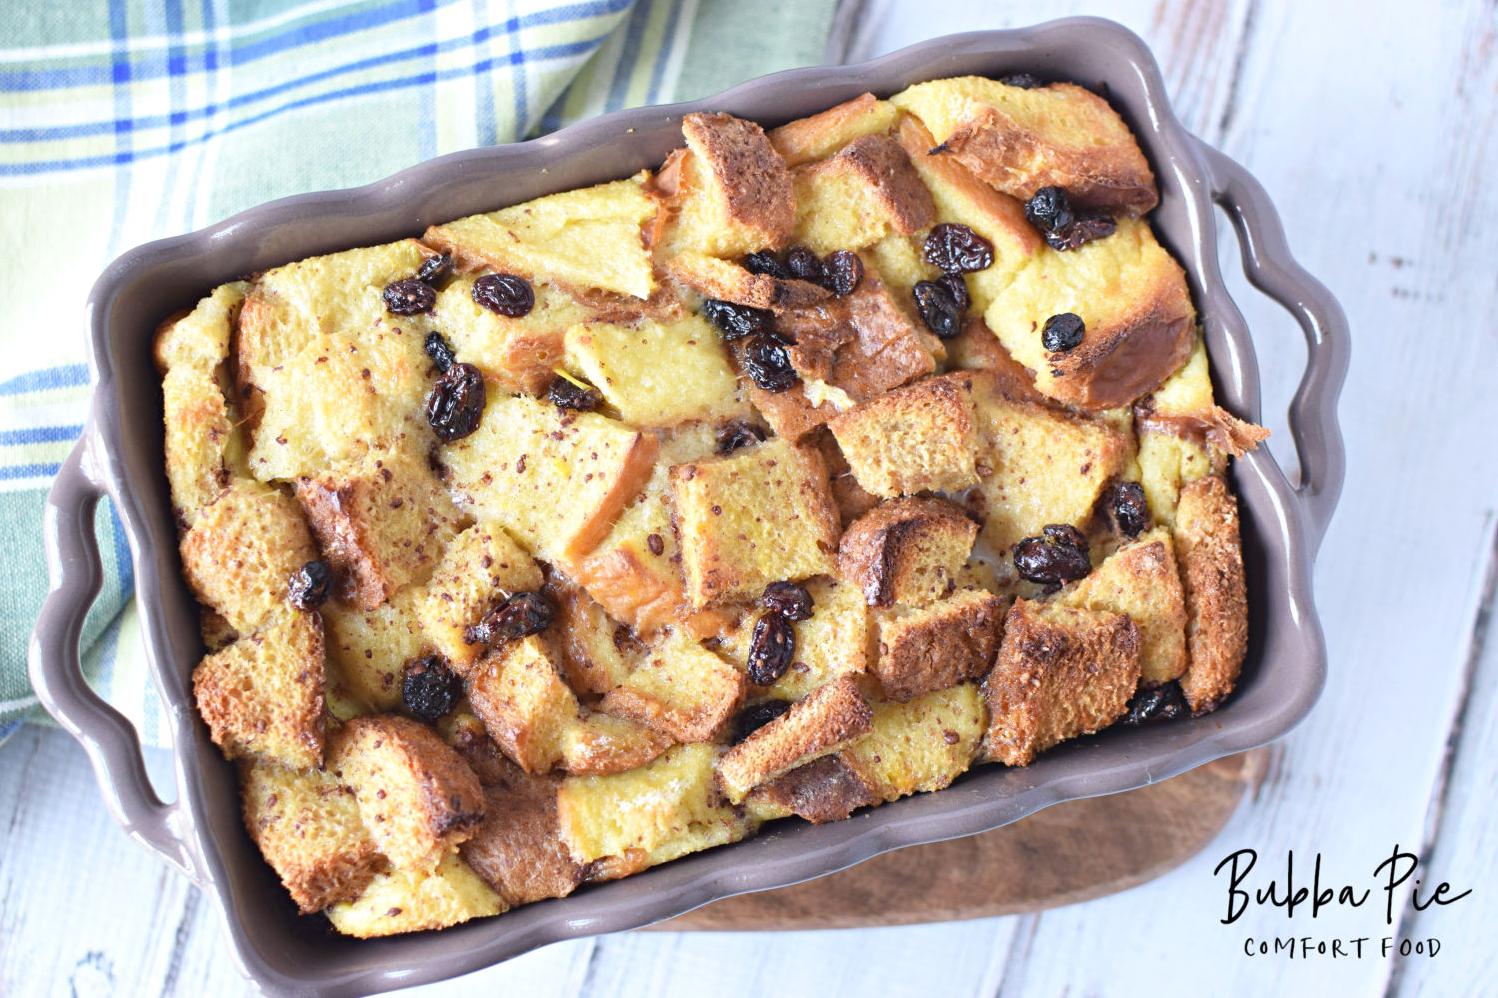  This Southern Bread Pudding will become a staple in your dessert recipe collection.